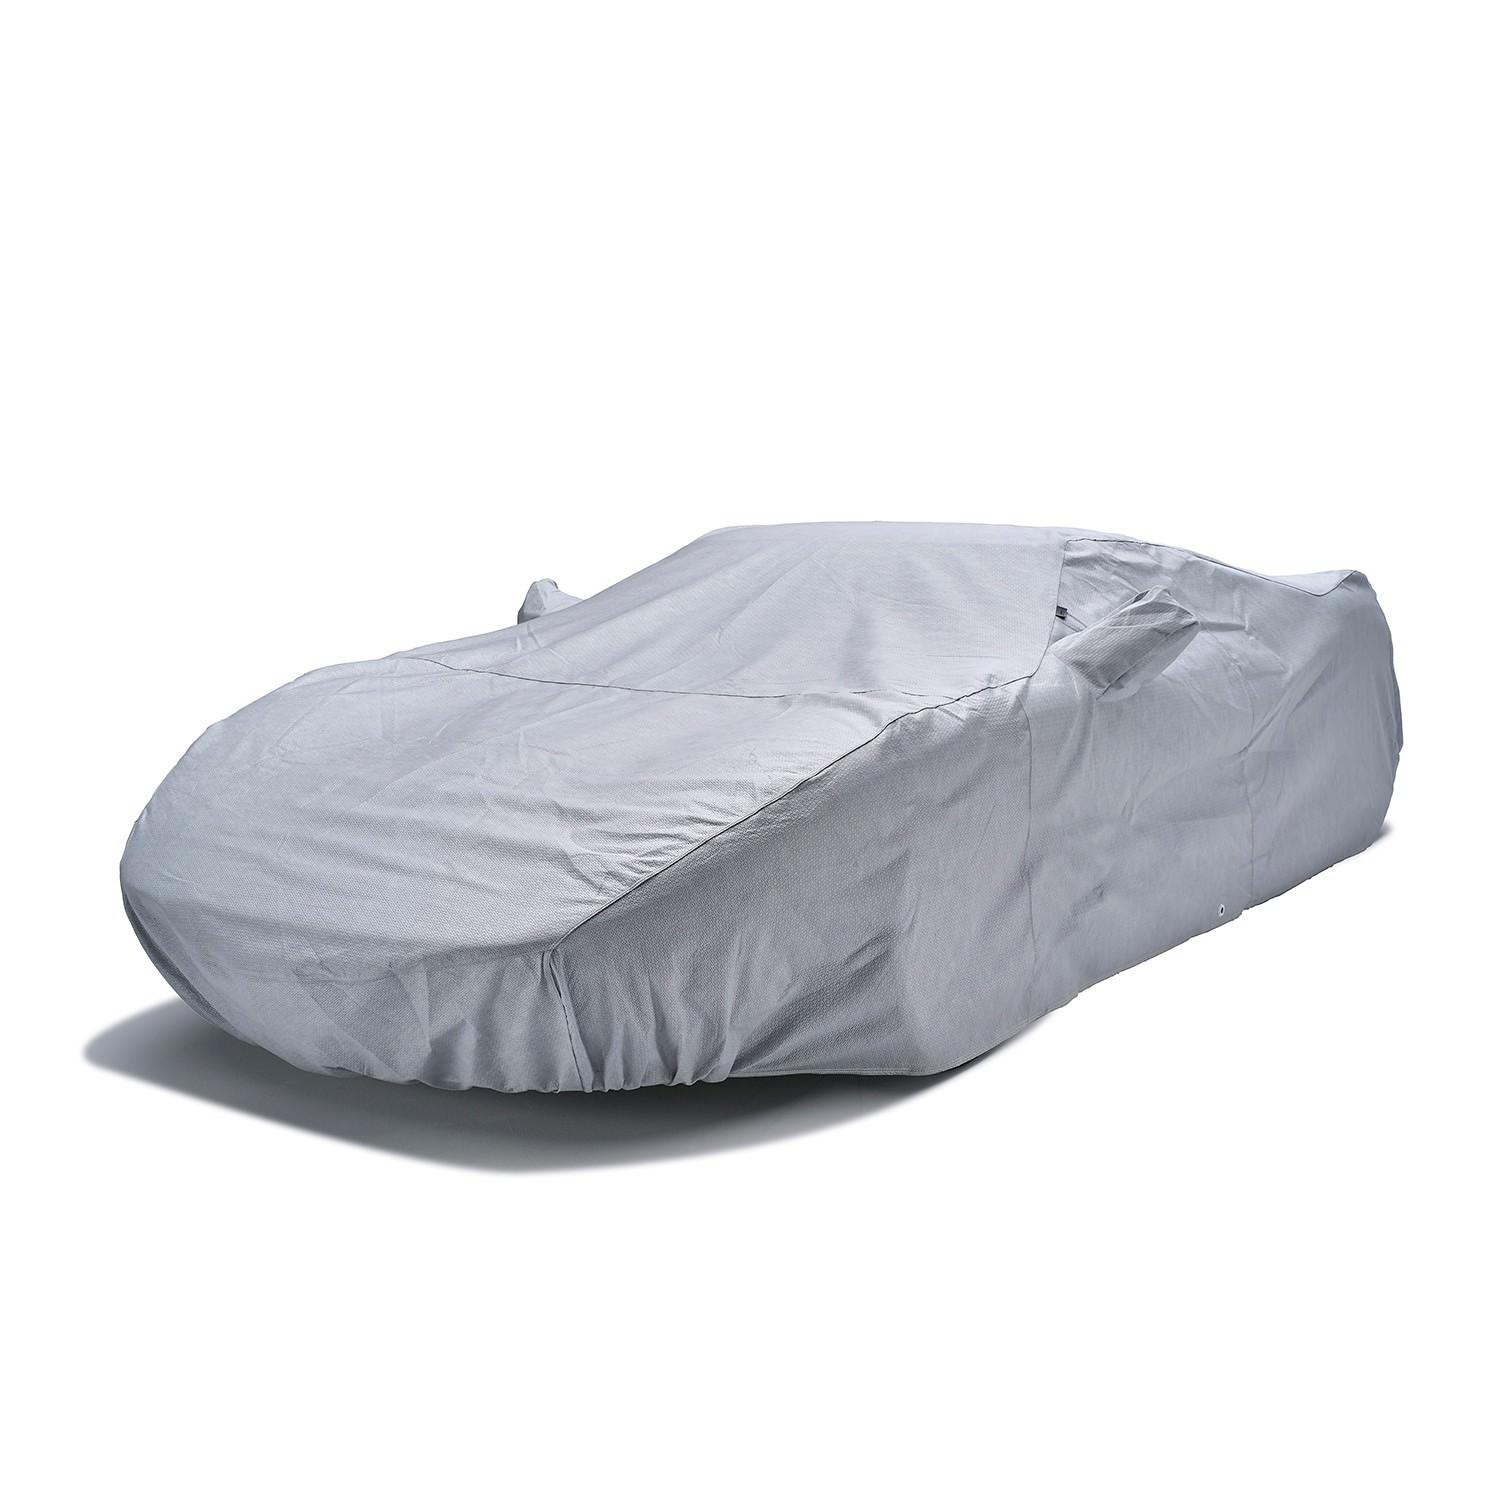 Covercraft Car Covers Indoor and Outdoor